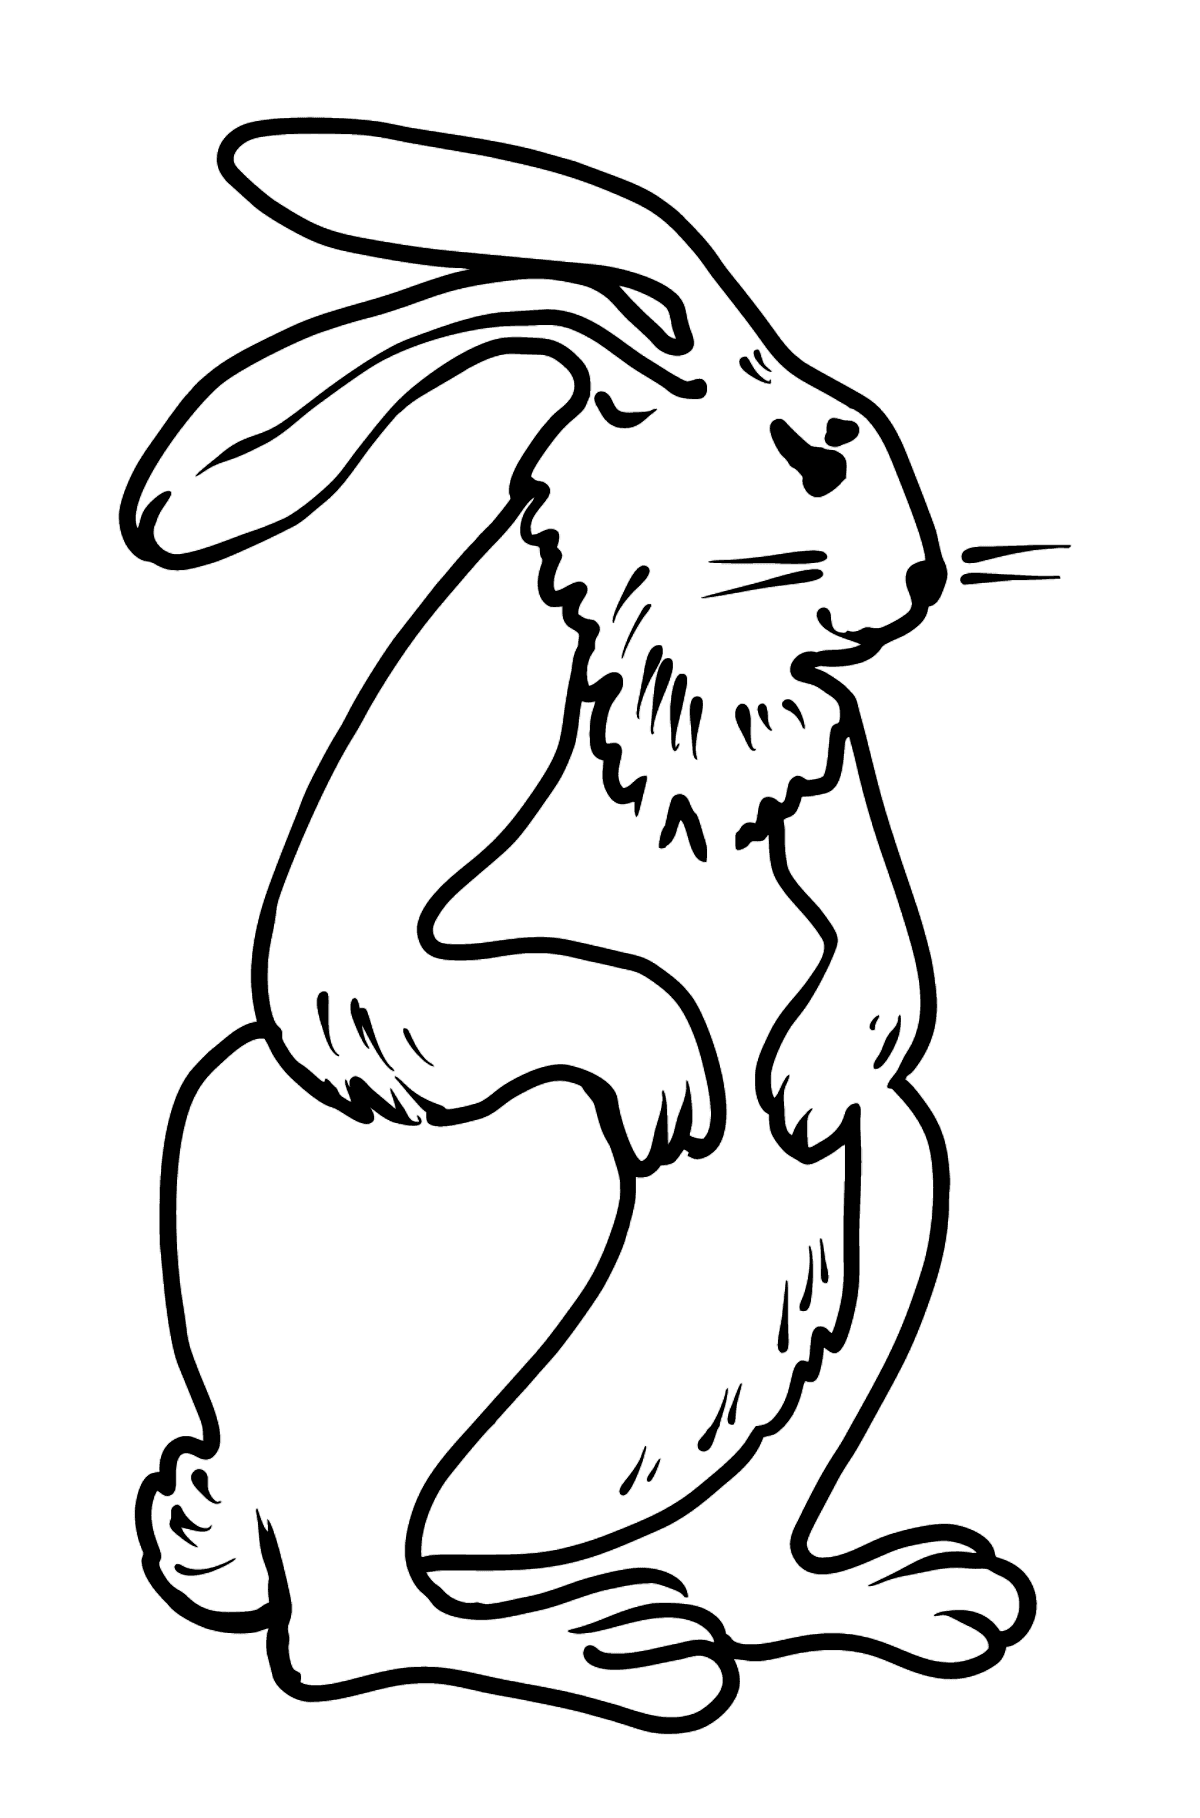 Rabbit coloring page - Coloring Pages for Kids